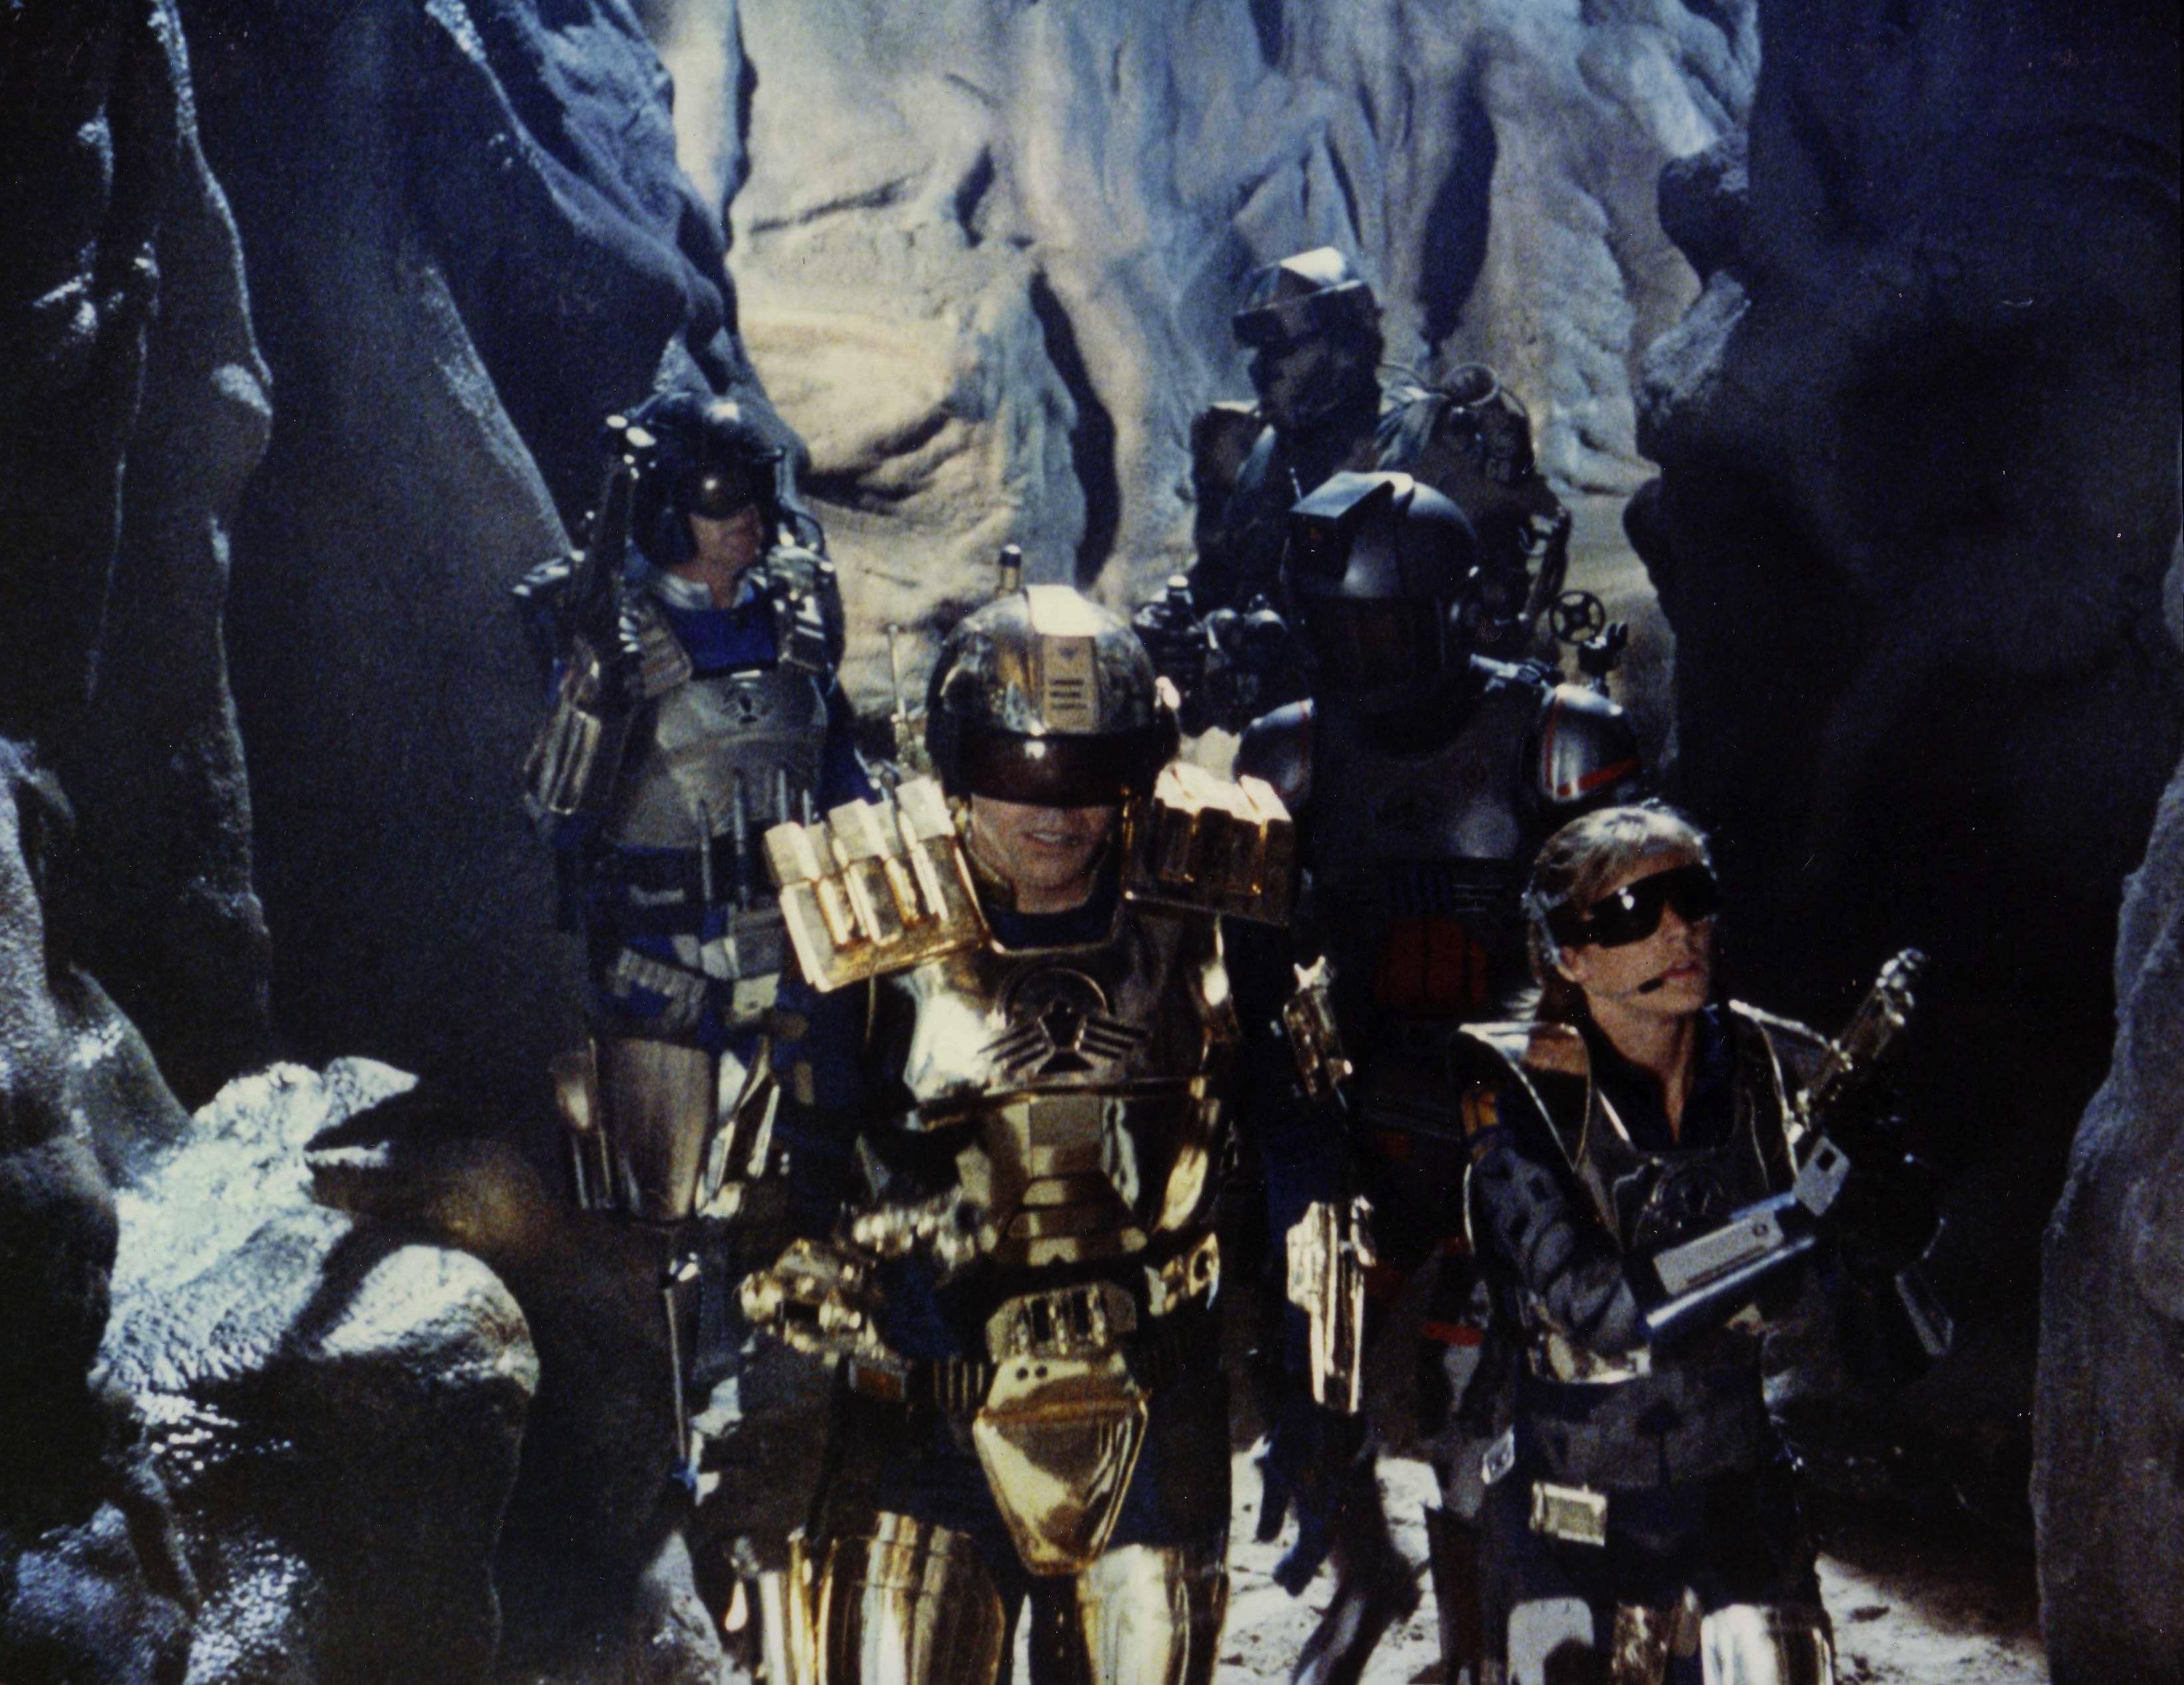 Tim Dunigan, Peter MacNeill, Jessica Steen, Sven-Ole Thorsen and Maurice Dean Wint in Captain Power and the Soldiers of the Future (1987)